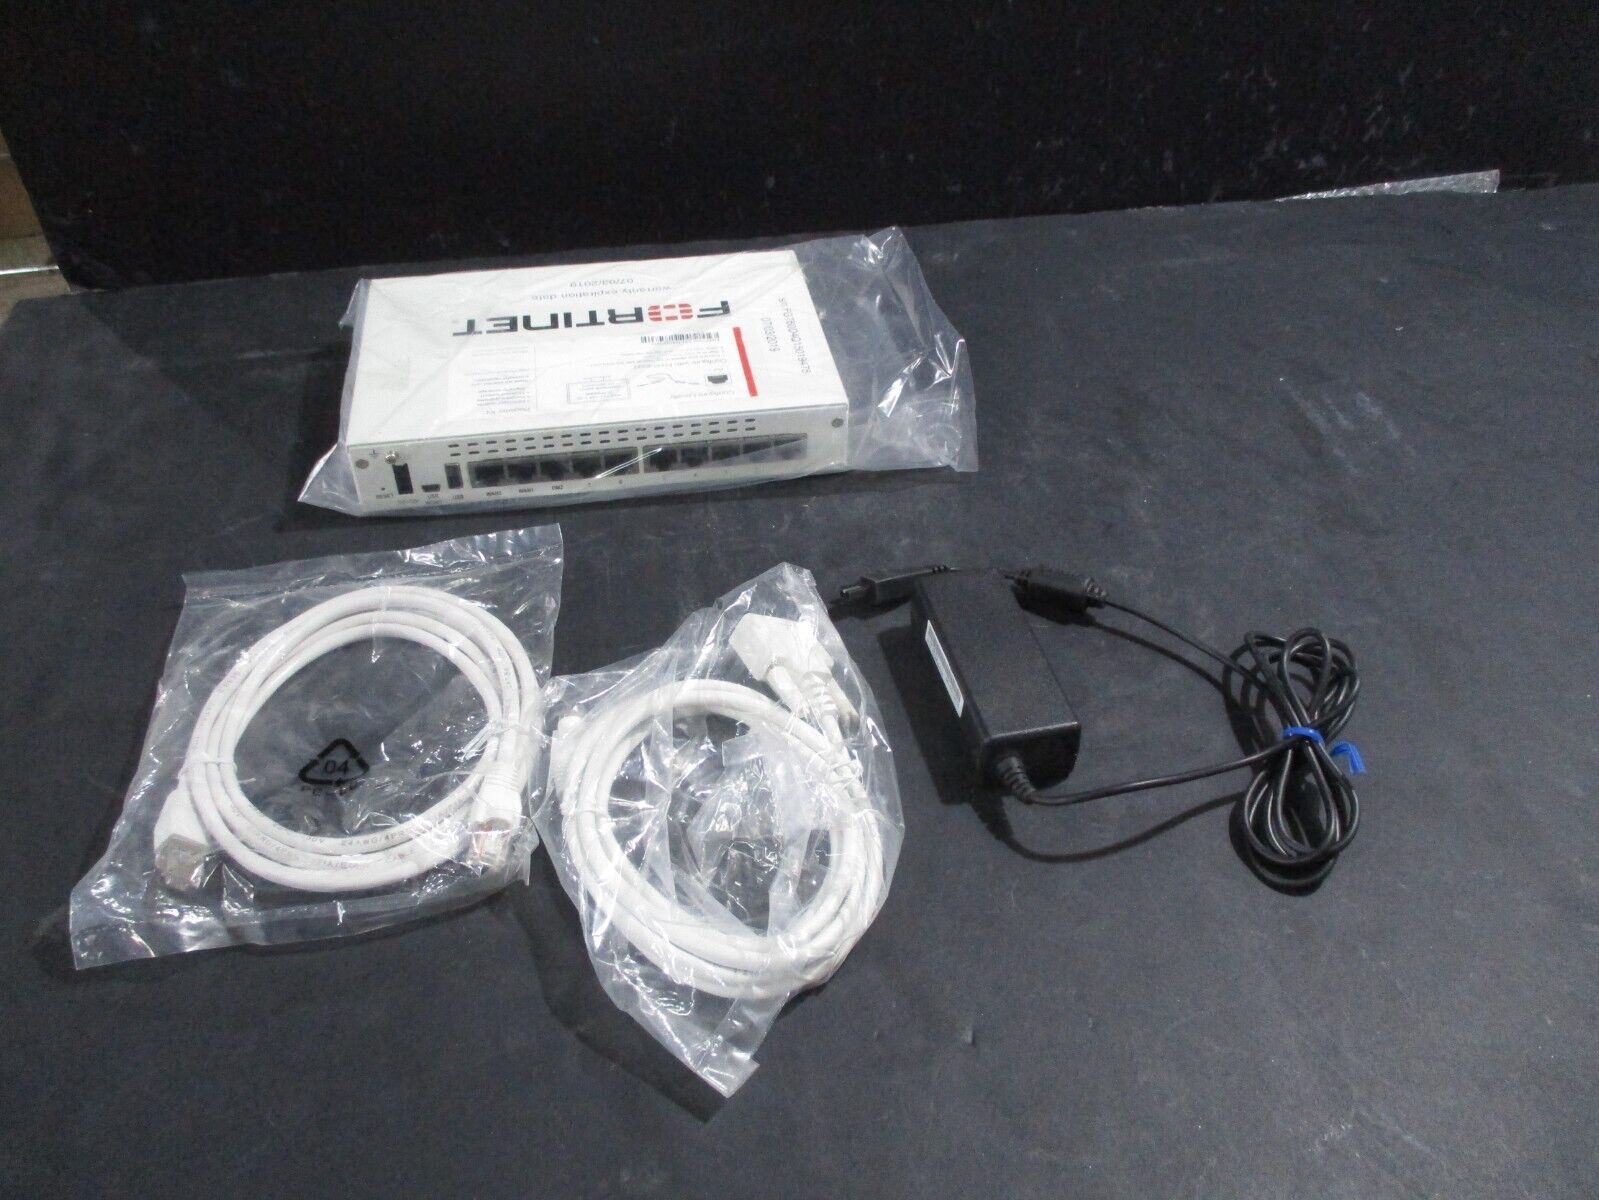 Fortinet FortiGate-60D FG-60D Firewall  Security Appliance w/ ADAPTER & CABLE